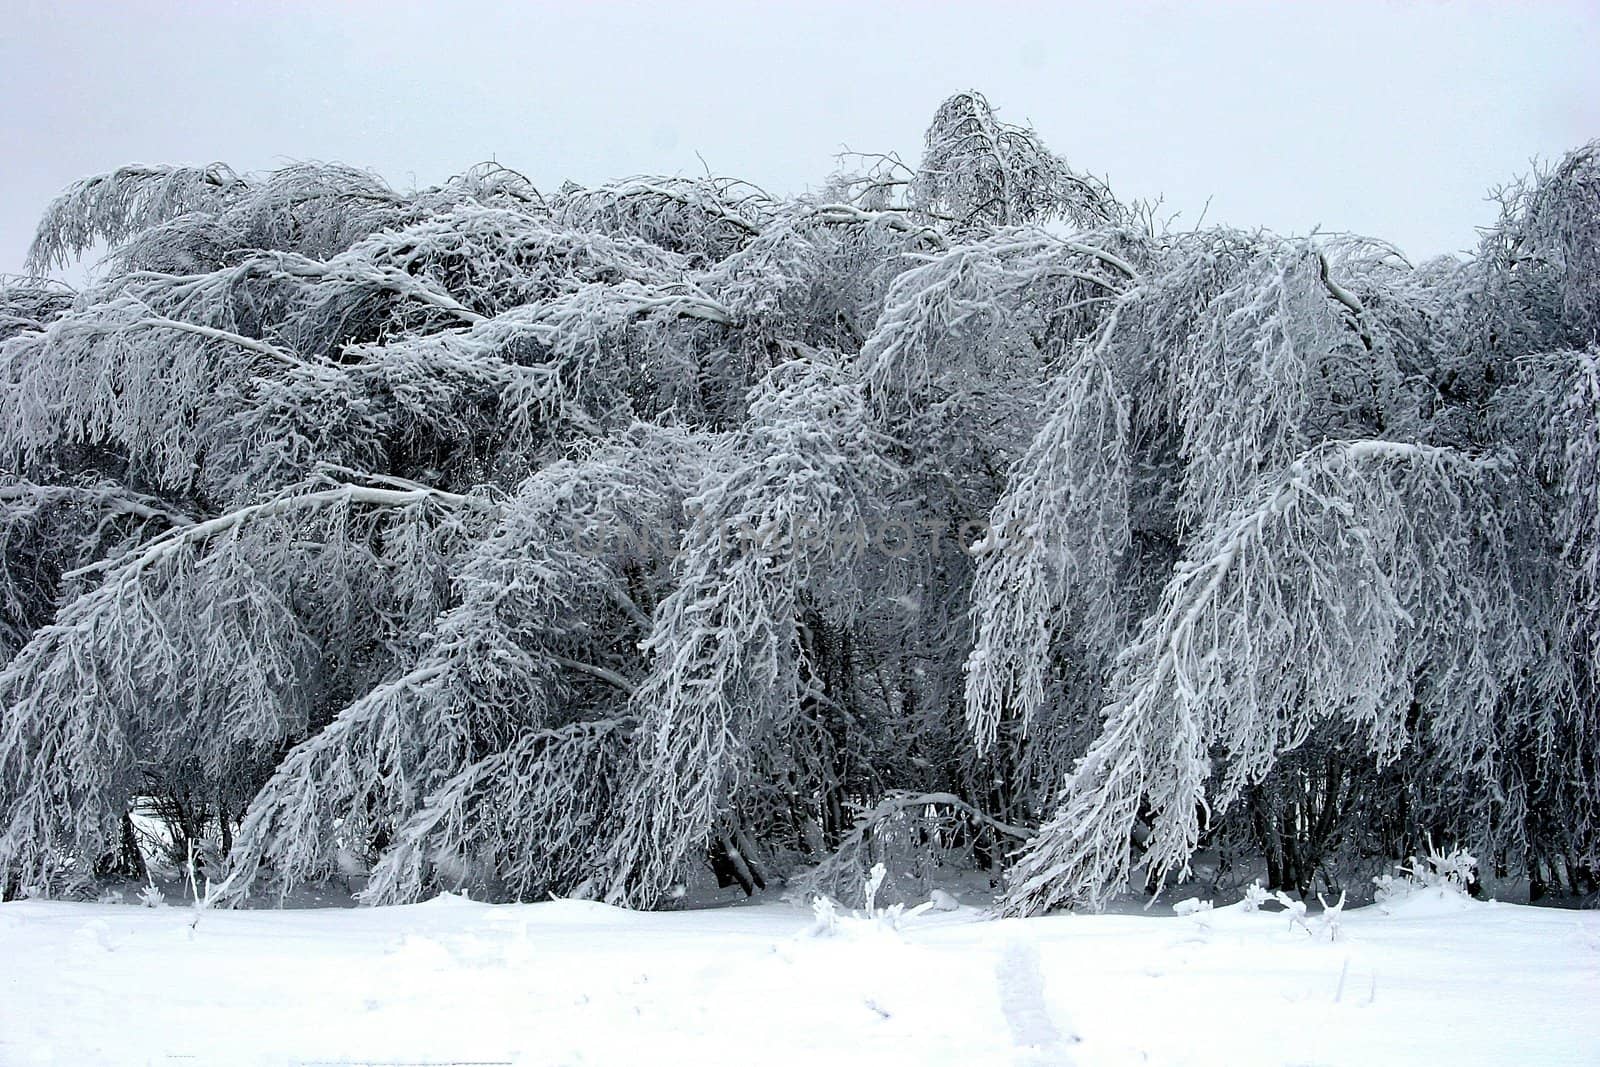 Snow ladden trees after a winter storm